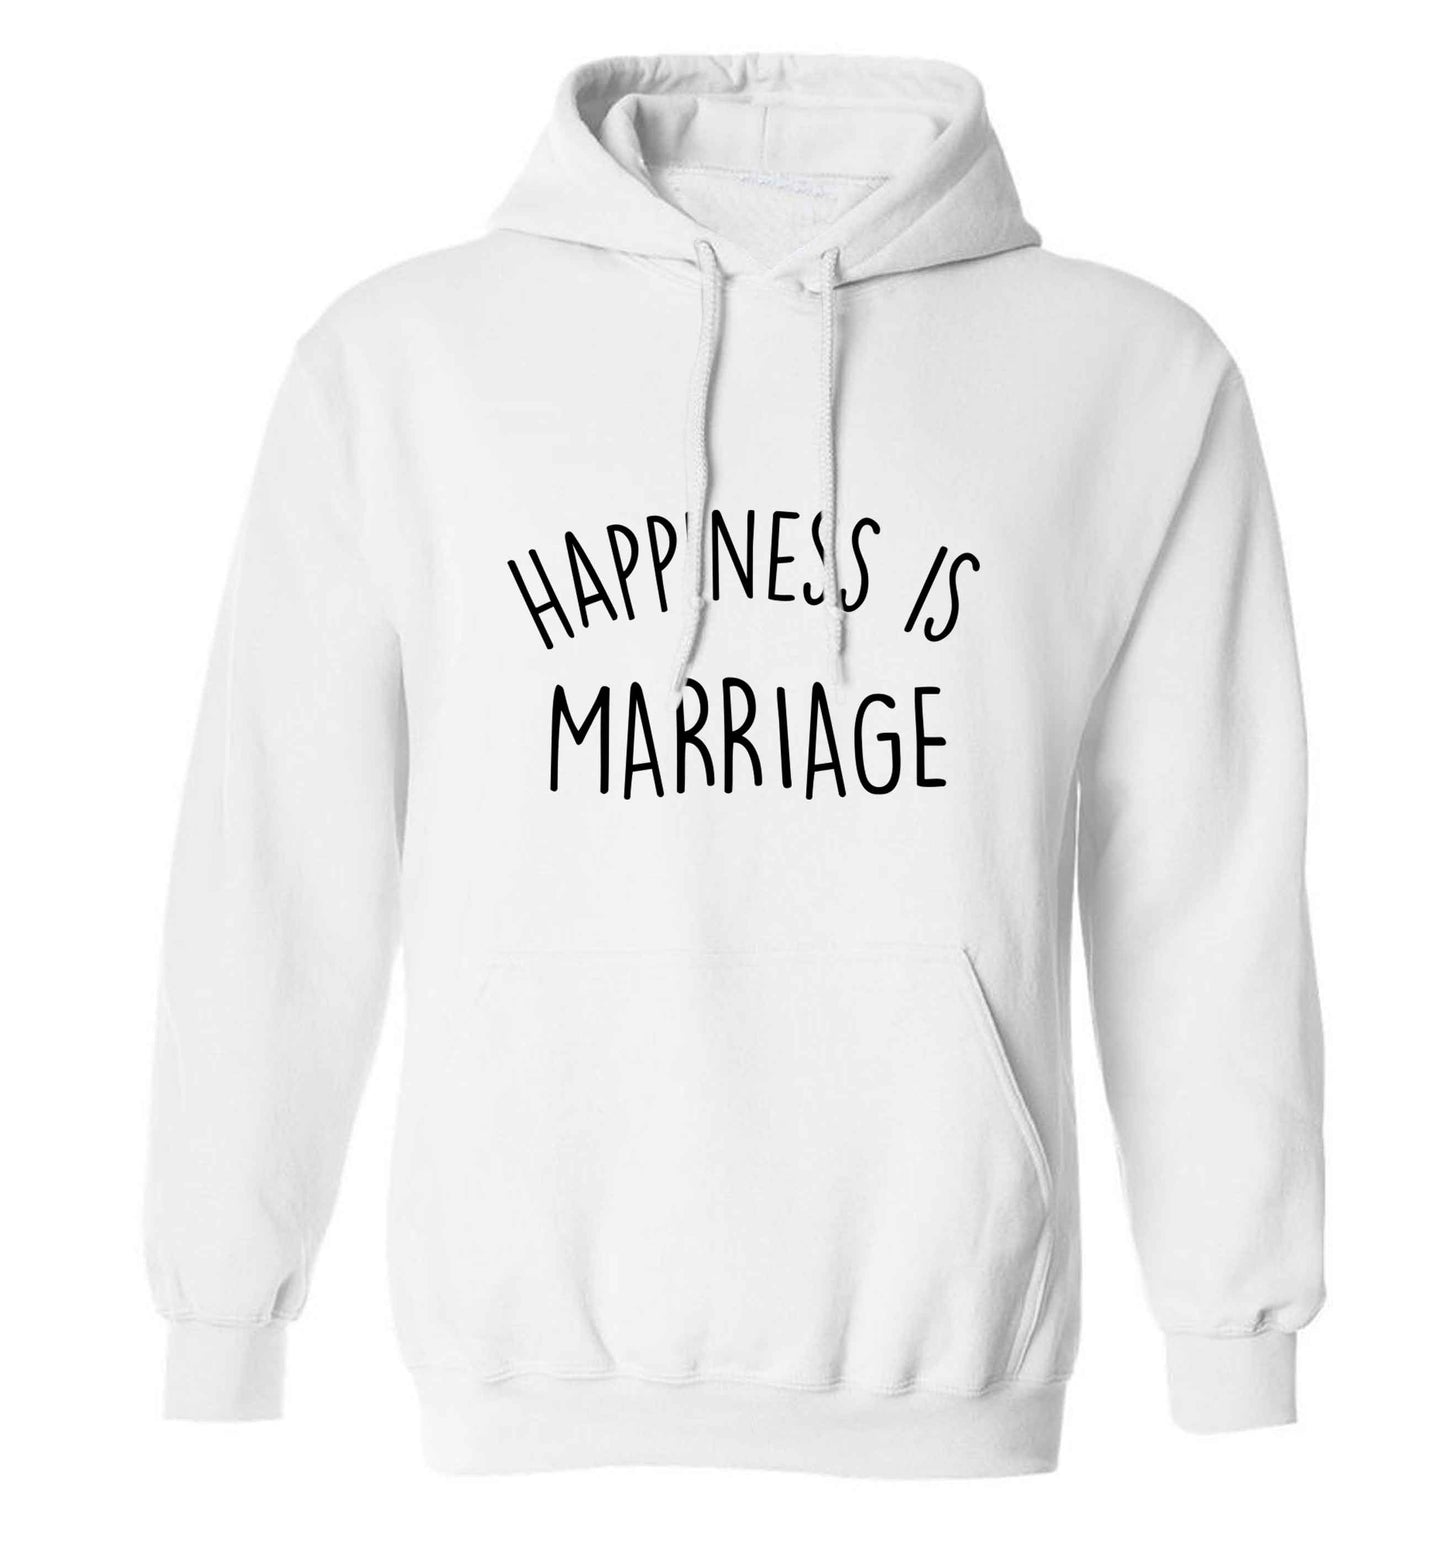 Happiness is wedding planning adults unisex white hoodie 2XL